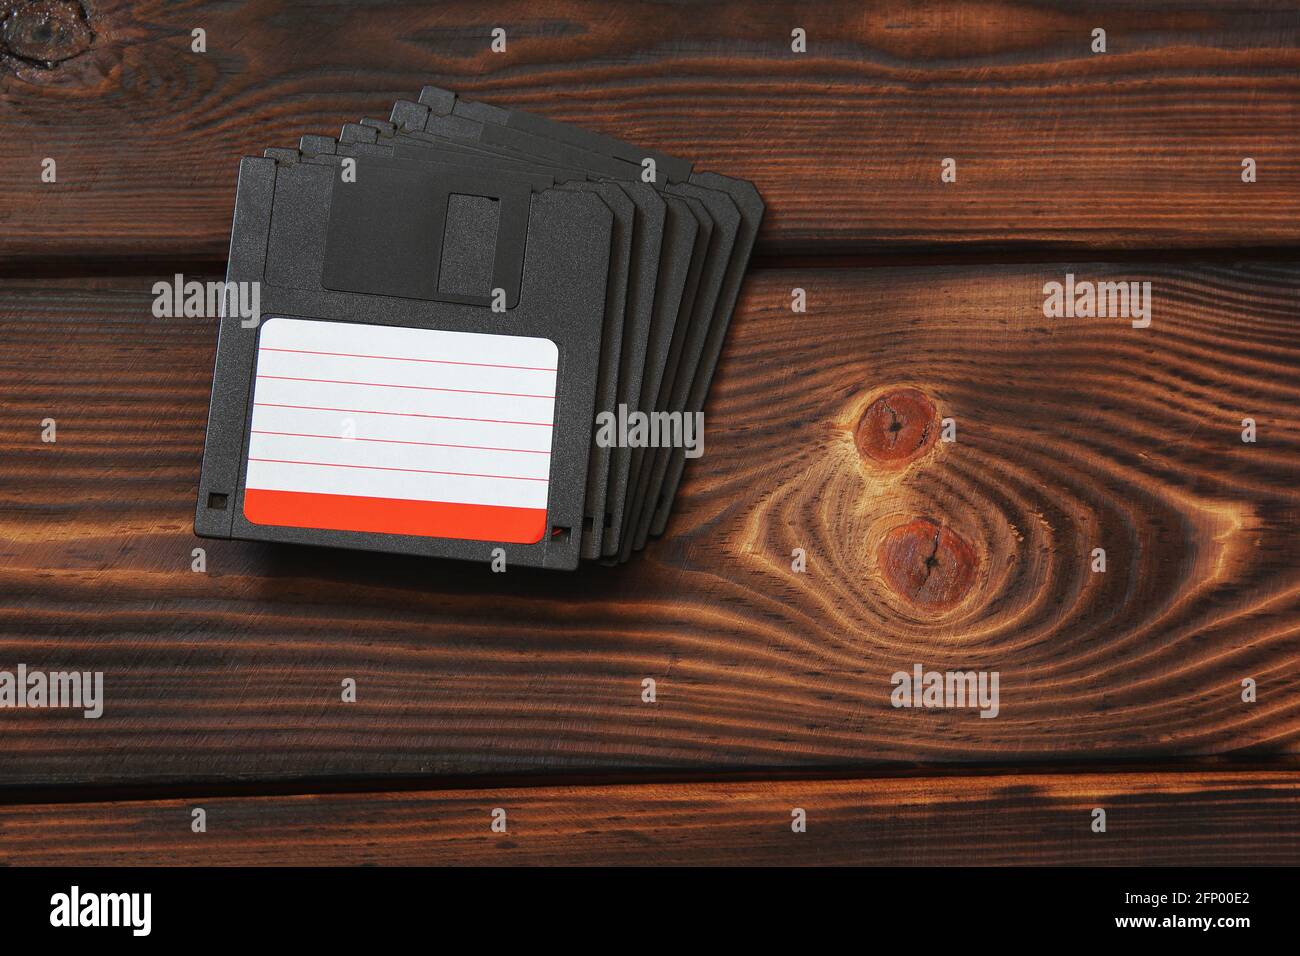 Diskettes on wooden background Stock Photo